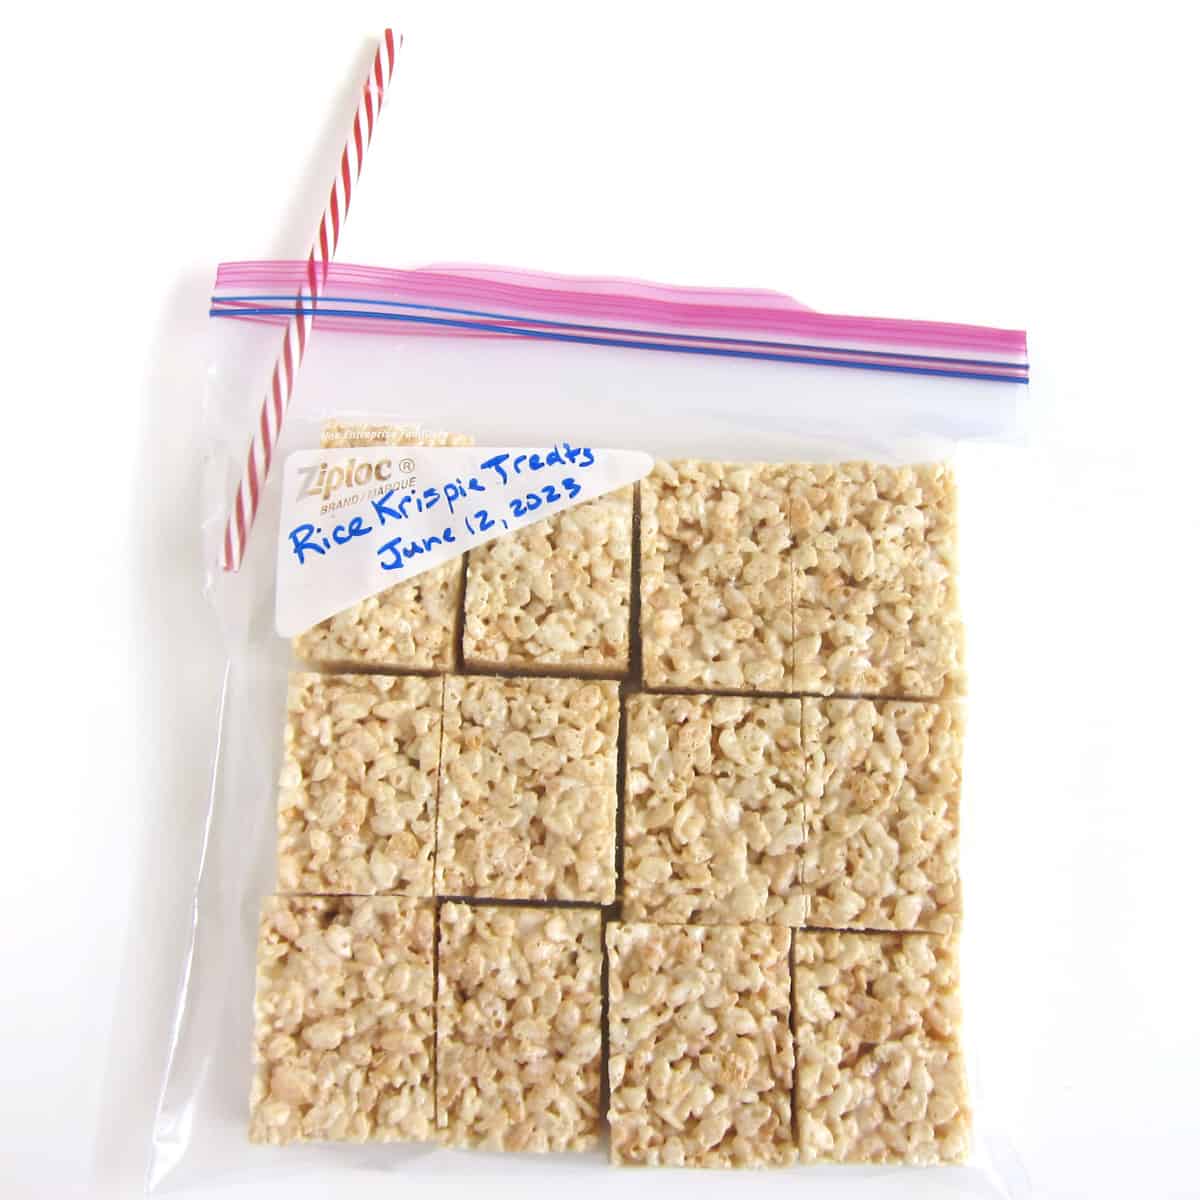 Remove air from a zip-top bag filled with Rice Krispie Treats using a straw.